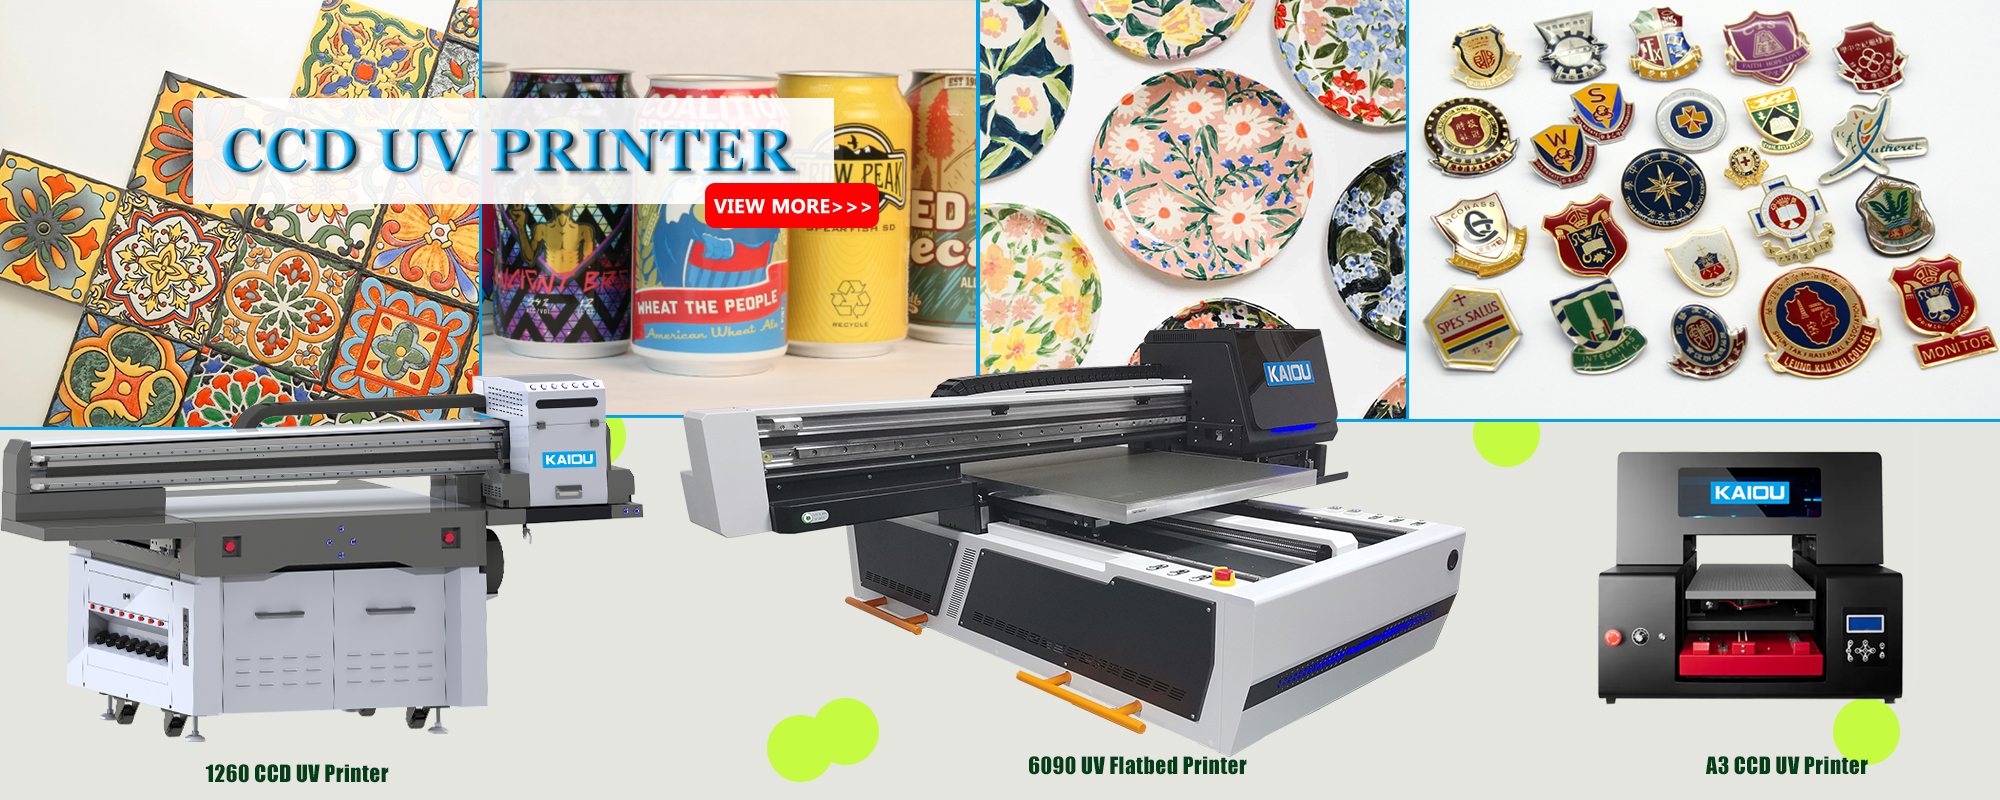 Discovering The Best in UV Printing: Why Kaiou UV Printers Are A Premier Choice